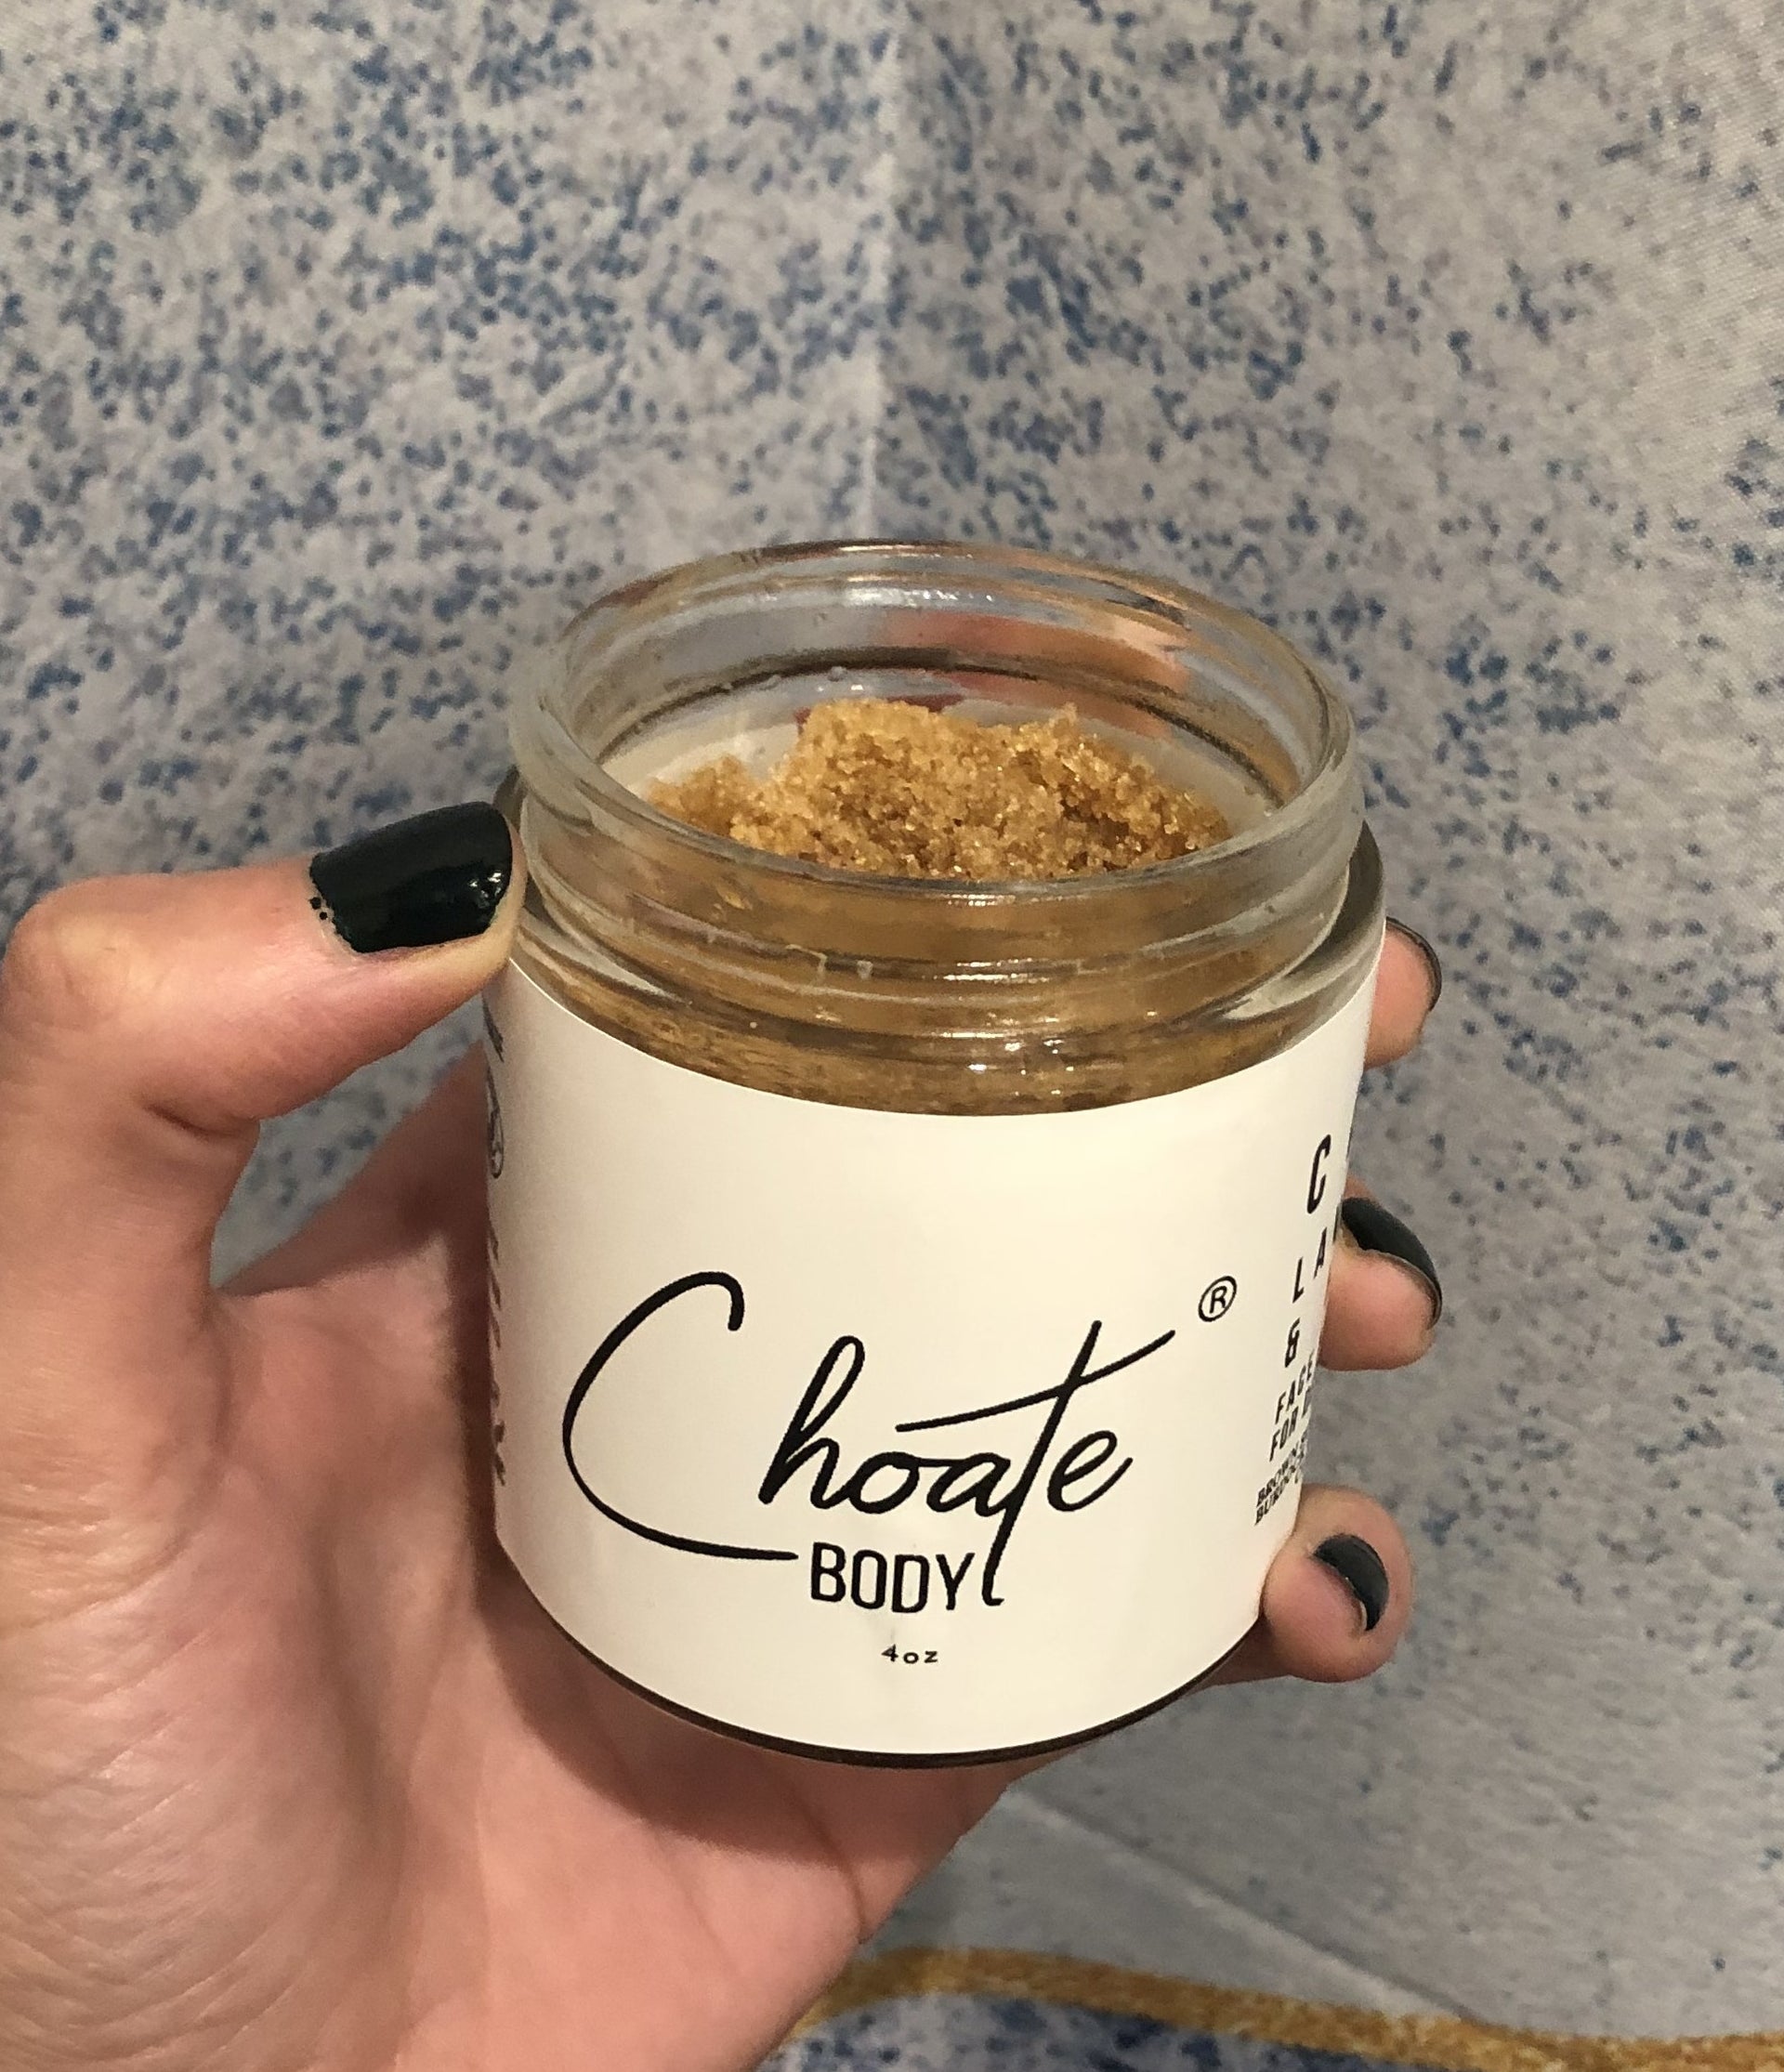 Open jar of same product to show smooth scrub inside